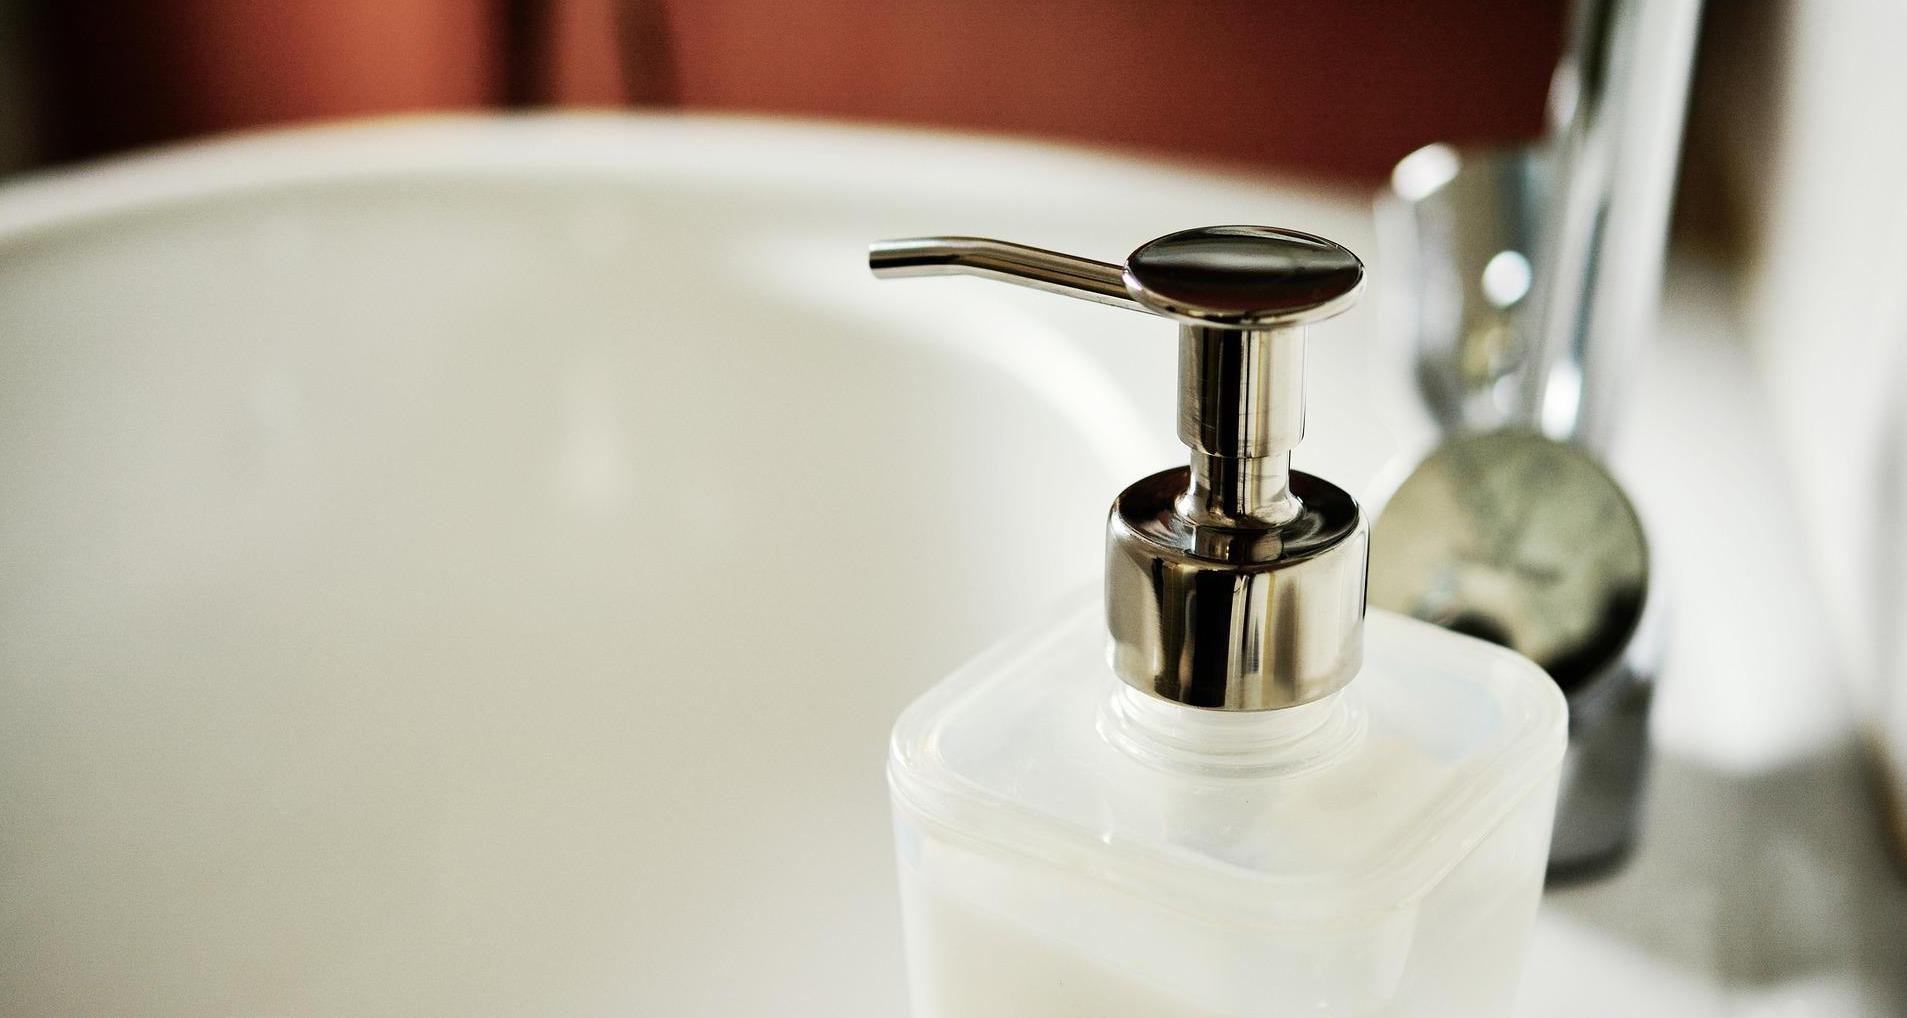 Domestic plumbing Sinks, taps, basins, bathrooms and showers